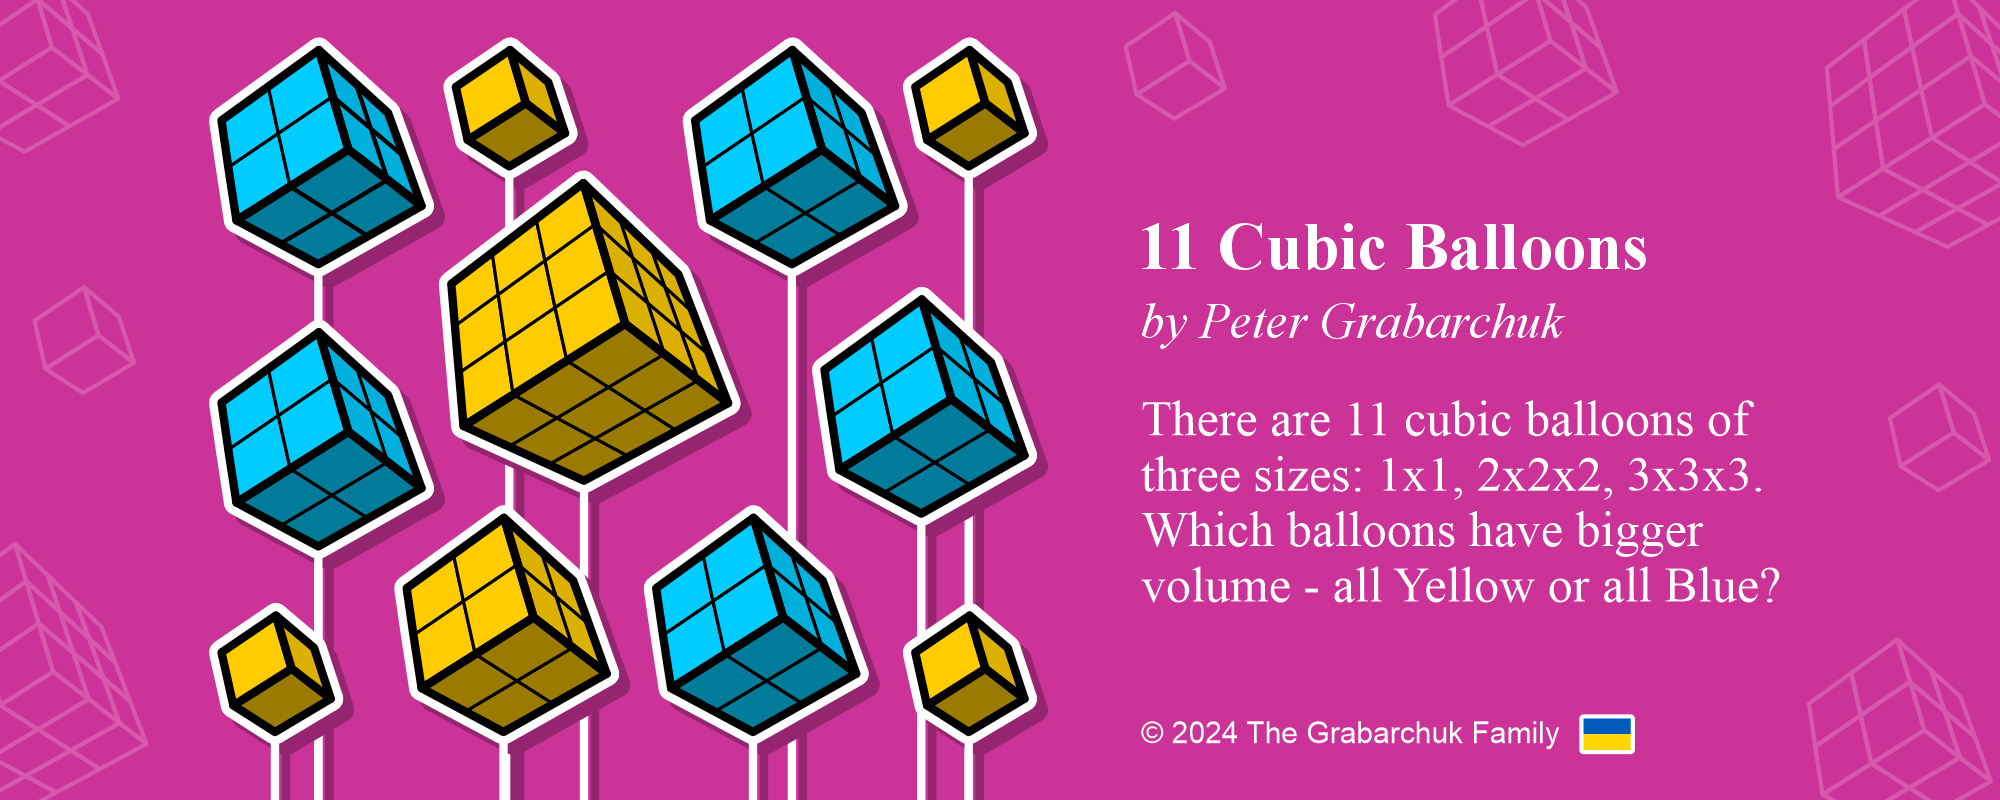 11 Cubic Balloons by Peter Grabarchuk